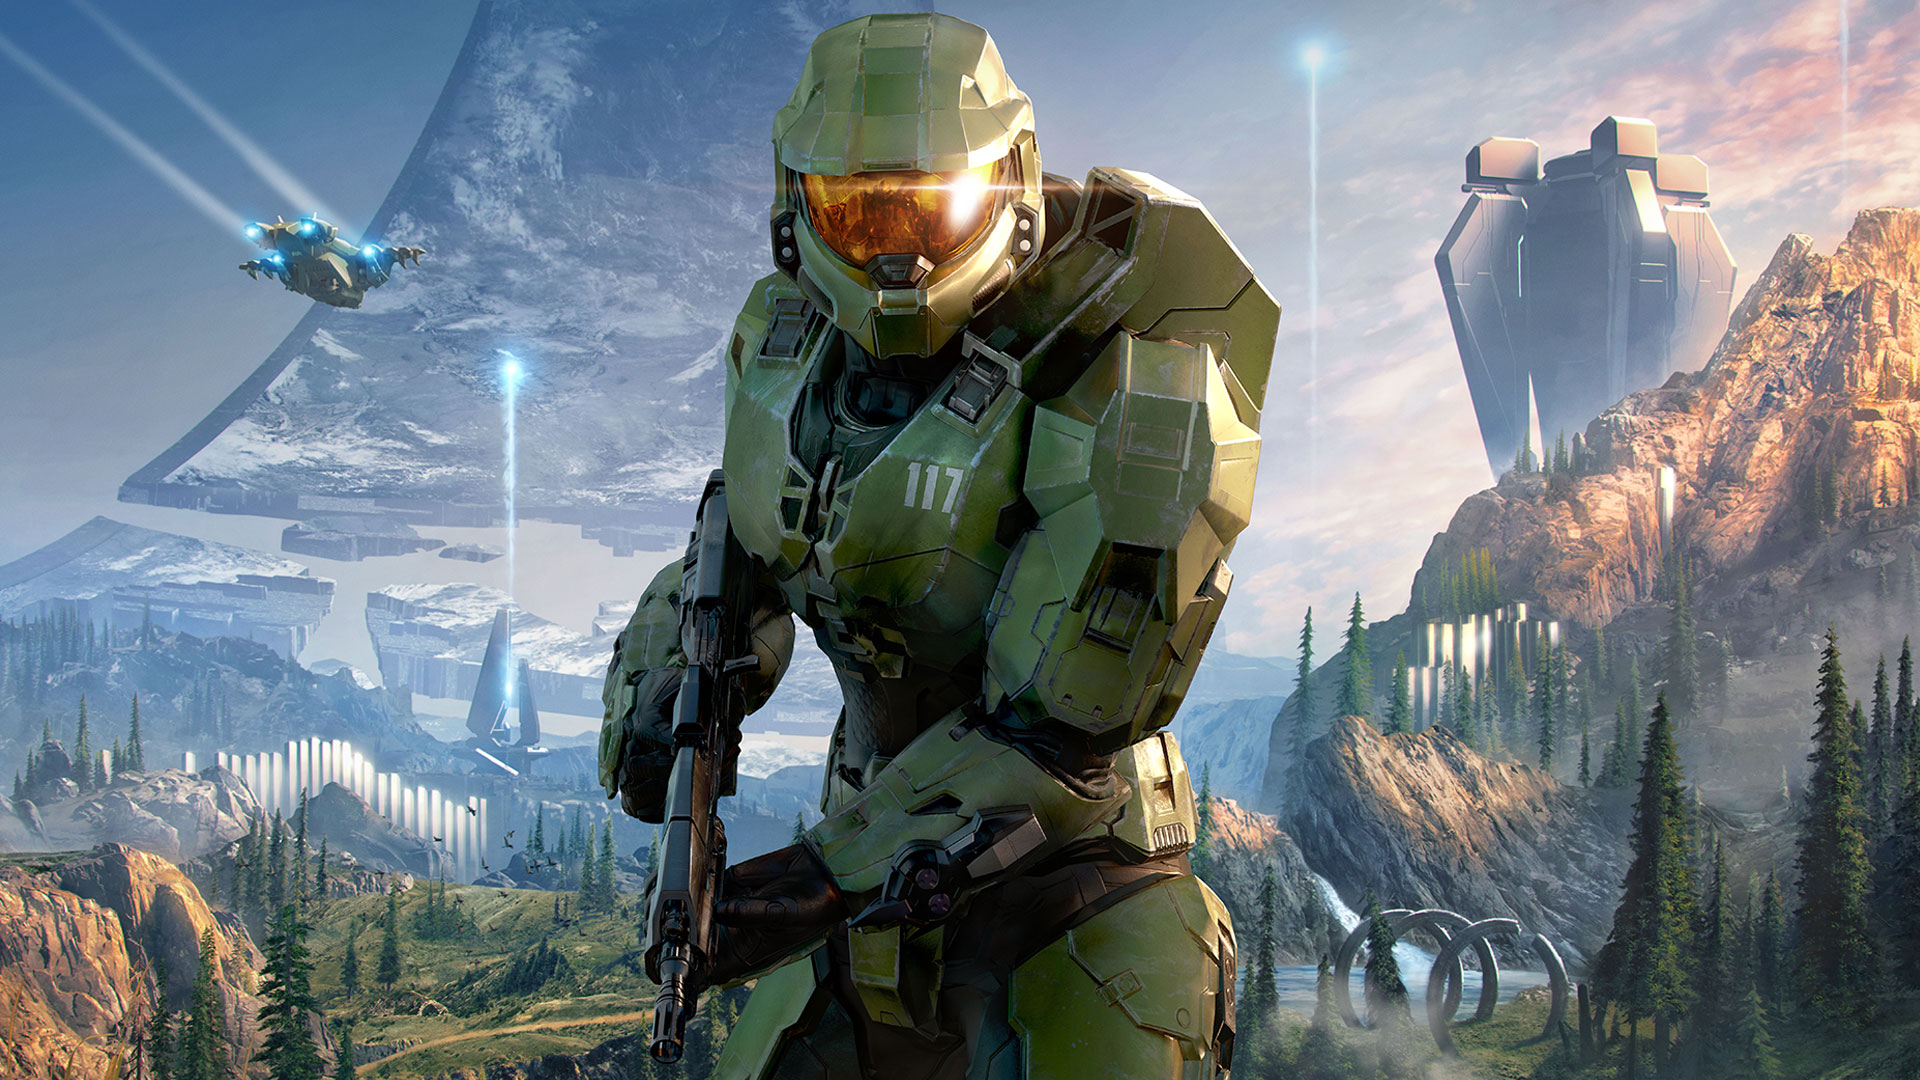 Halo TV show marks return to filming with first look at Master Chief helmet  | GamesRadar+